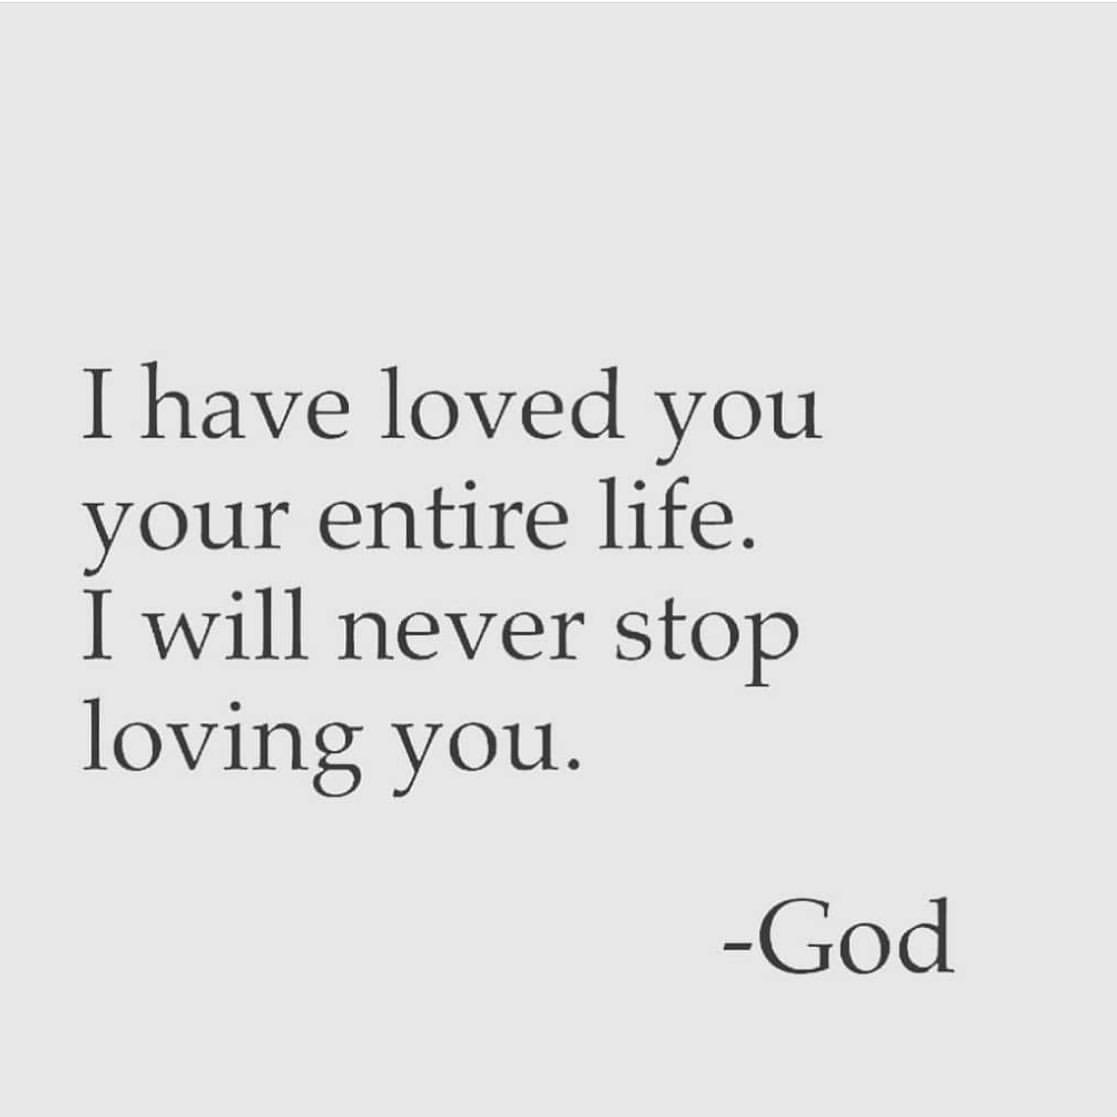 I have loved you your entire life. I will never stop loving you. God.